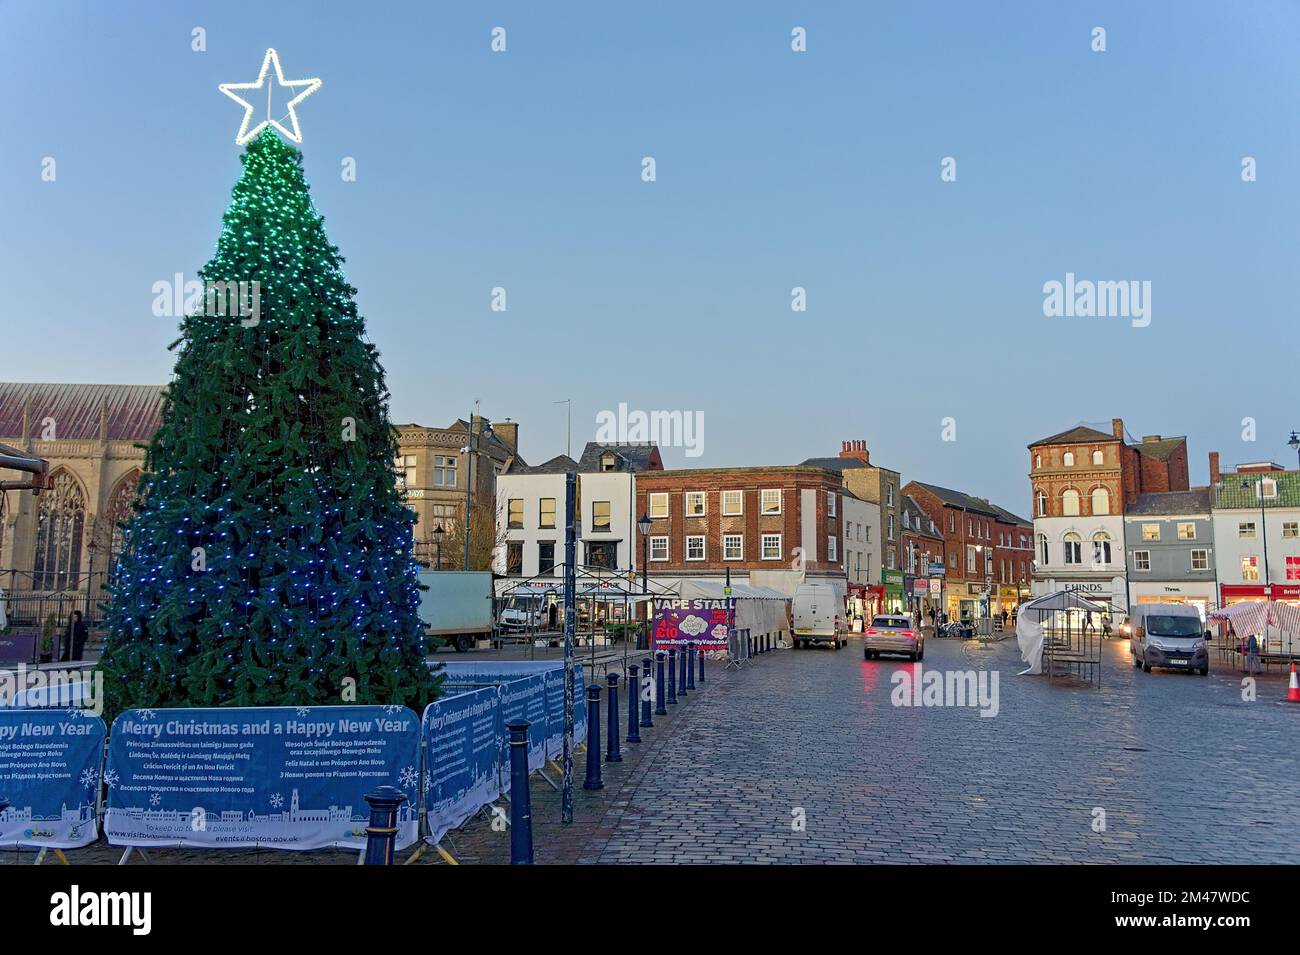 The Christmas tree in the marketplace at sundown. Stock Photo